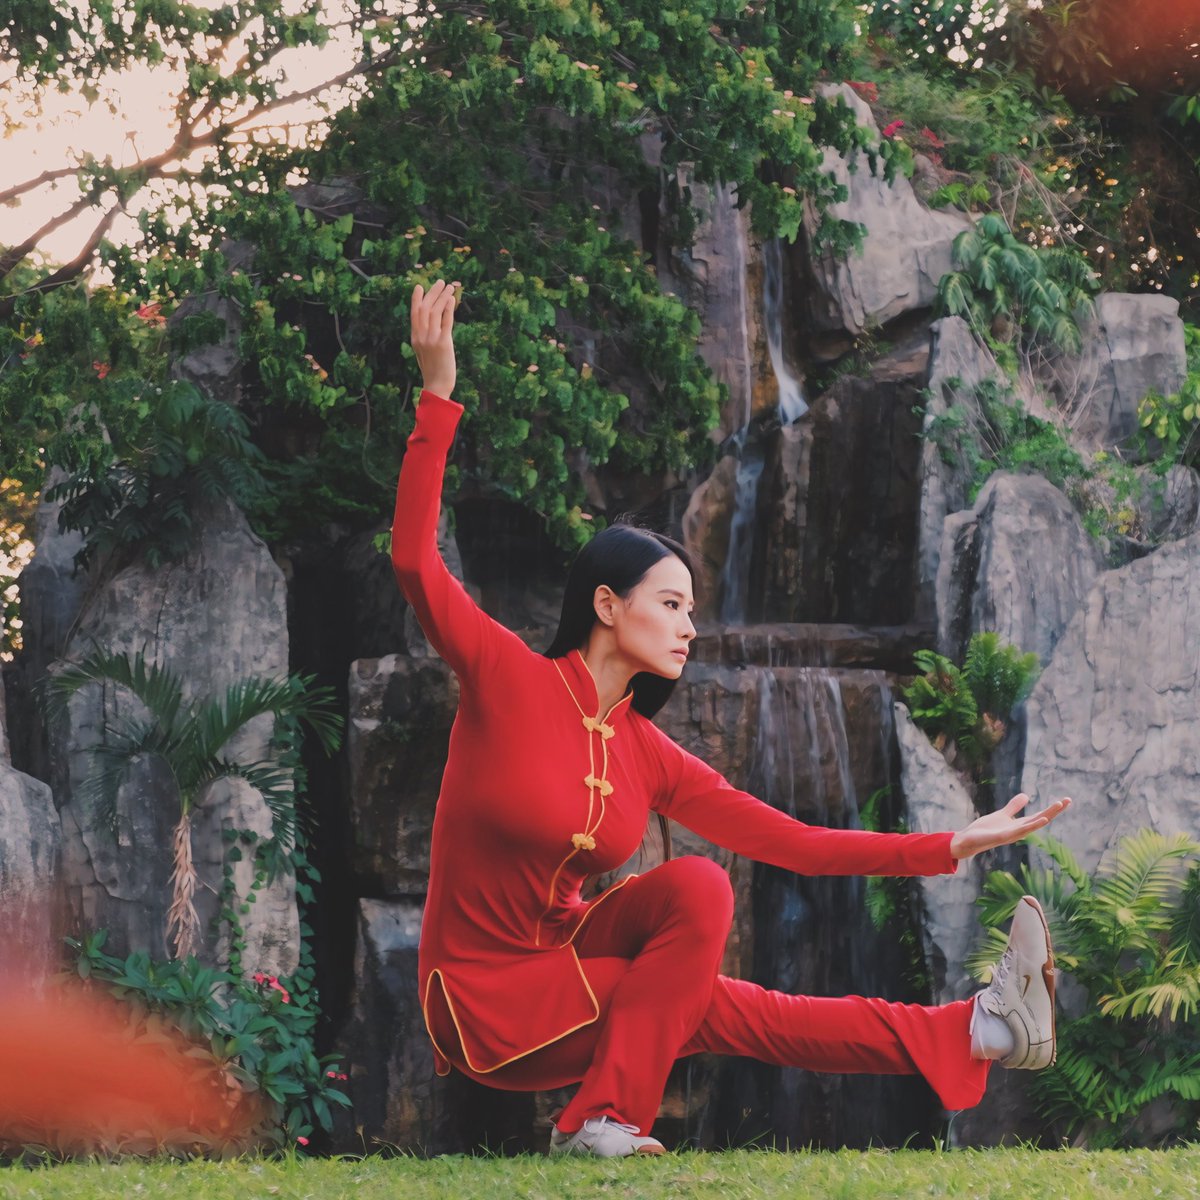 Embrace the art of balance, where every movement flows with purpose. In the stillness of Taichi, find your strength and harmony. 🌿✨ 
 
To learn Taichi checkout janicehung.com
.
.
.

#Taichi #Balance #InnerPeace #photooftheday #wushuqueen #janicehung